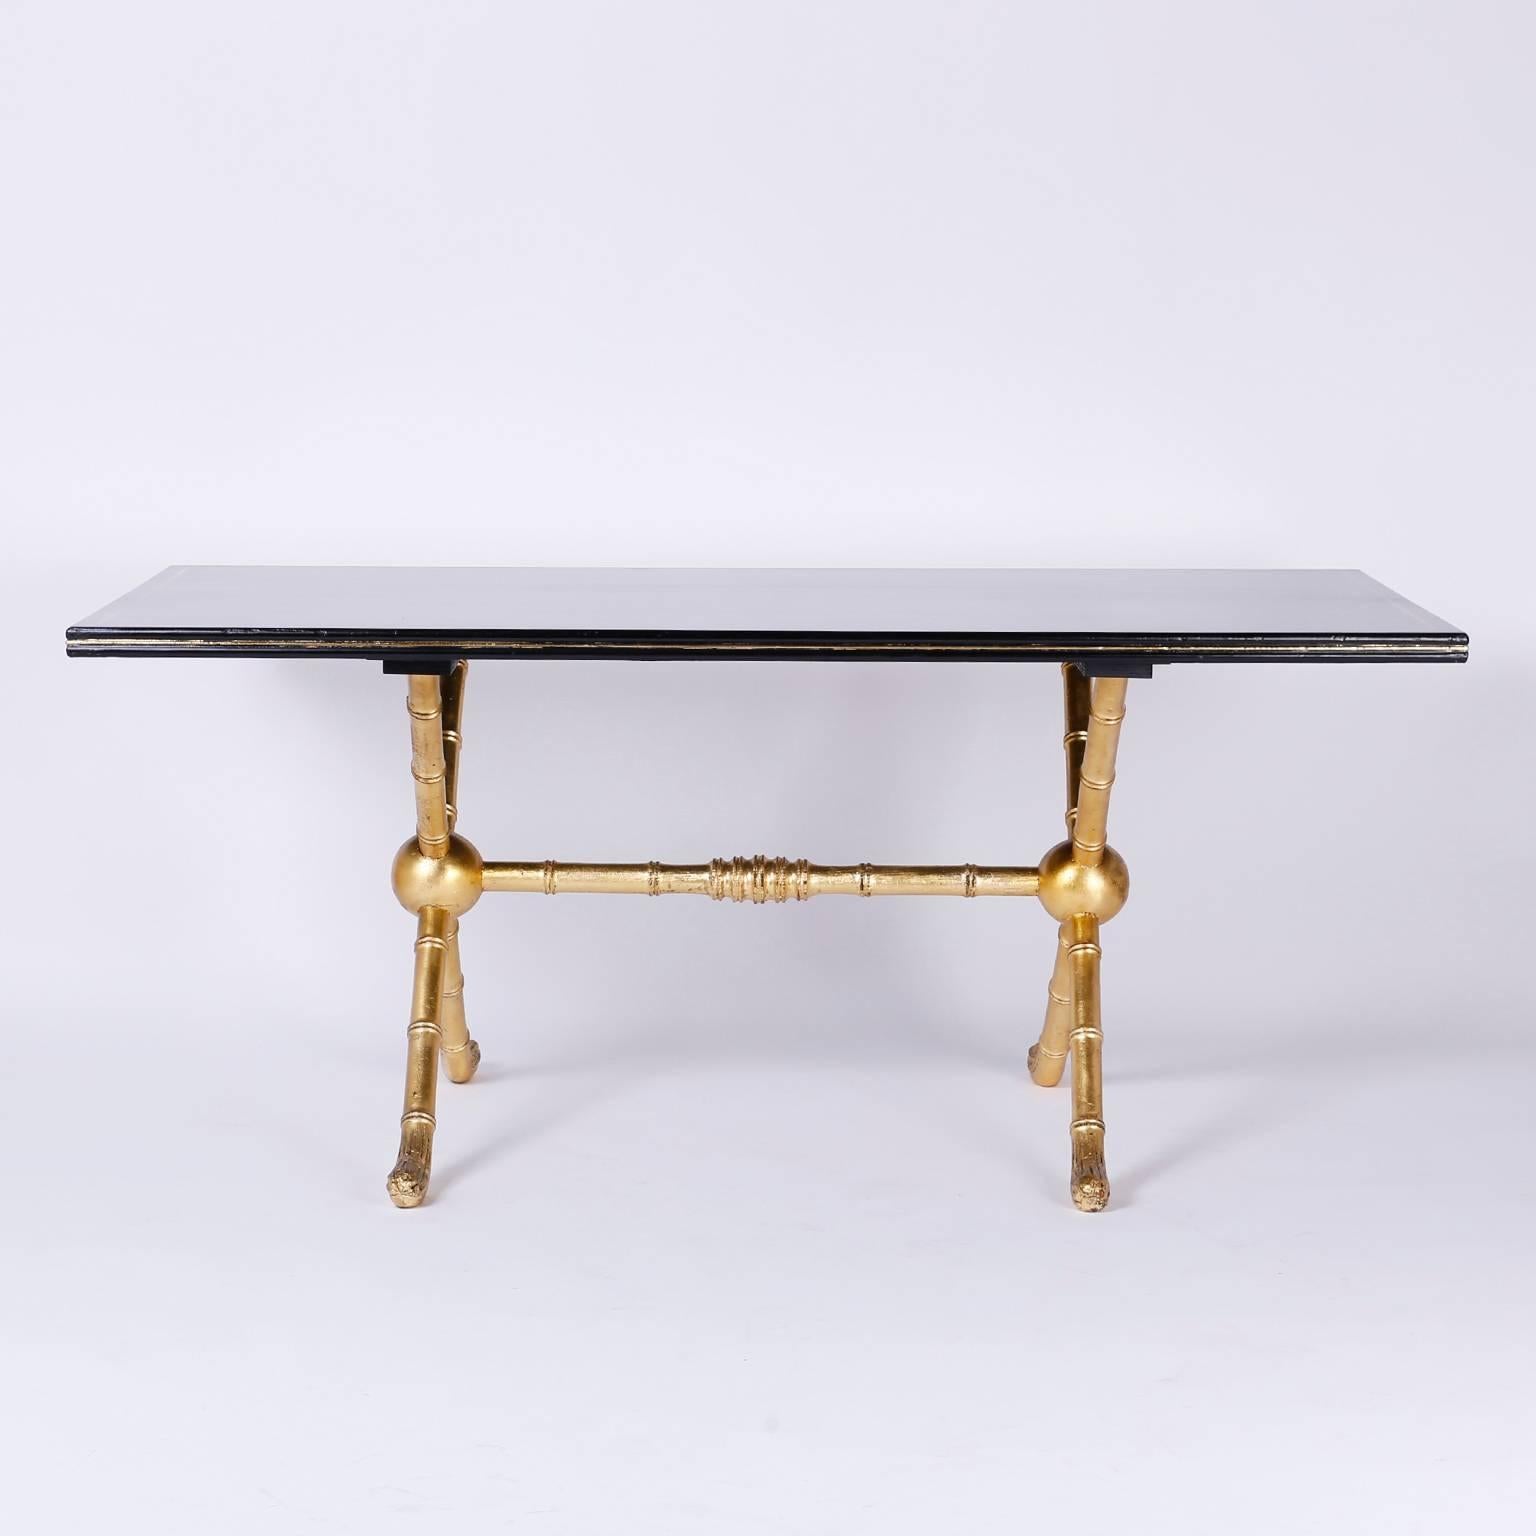 Unusual table with a black lacquered gilt trimmed top. The well detailed carved wood bamboo X-shaped legs are connected by a turned stretcher that is all in gold leaf. This can be utilized as a dining, writing or display table.